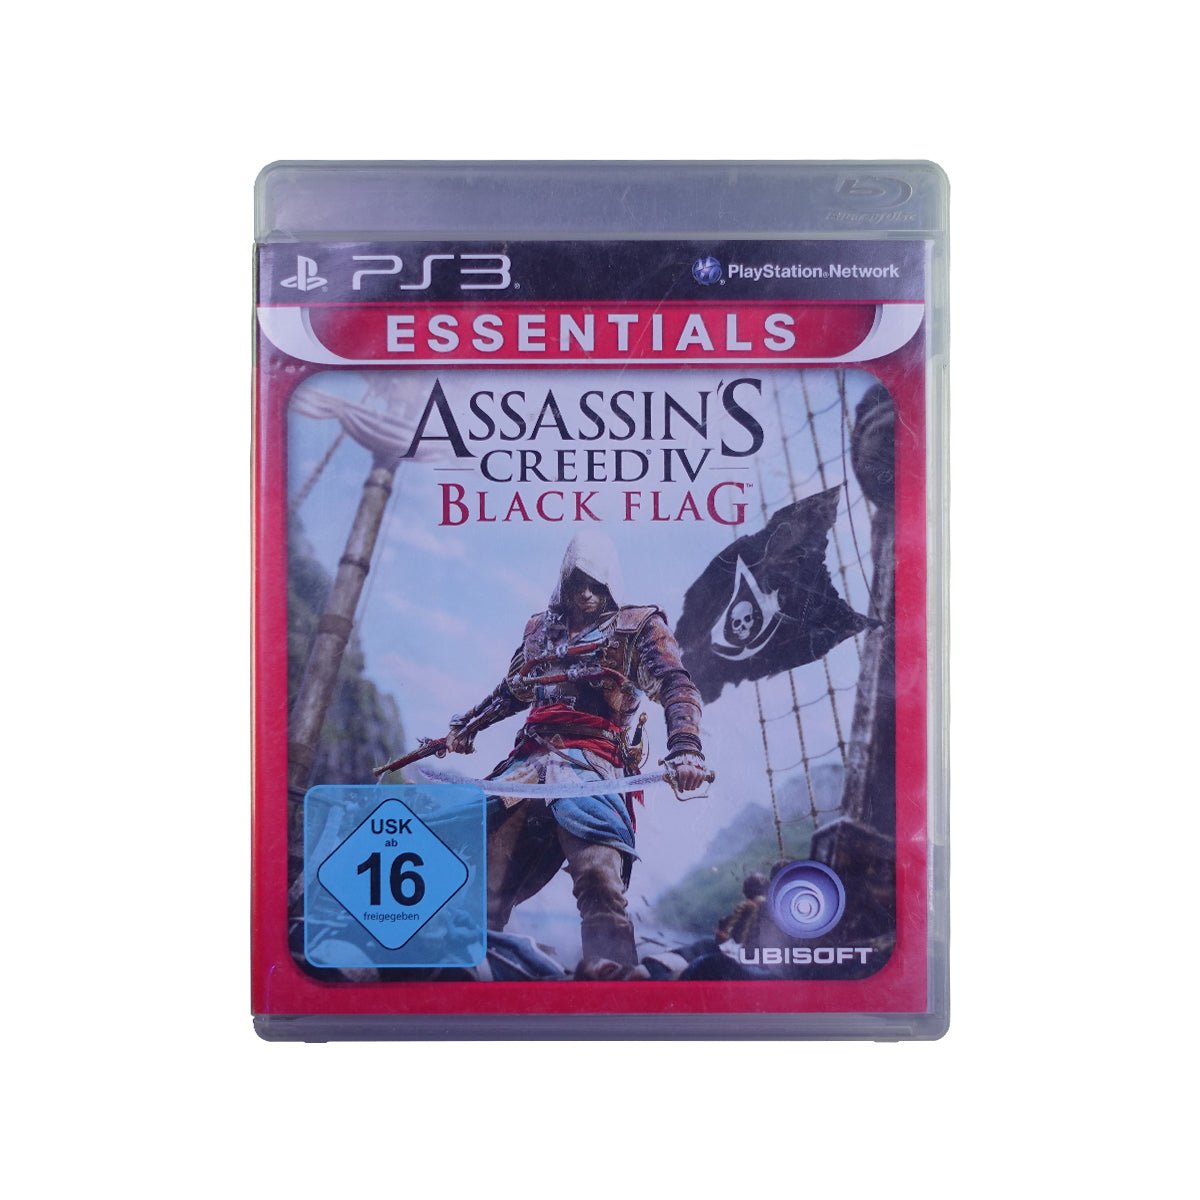 (Pre-Owned) Assassin's Creed IV Black Flag - PlayStation 3 - ريترو - Store 974 | ستور ٩٧٤